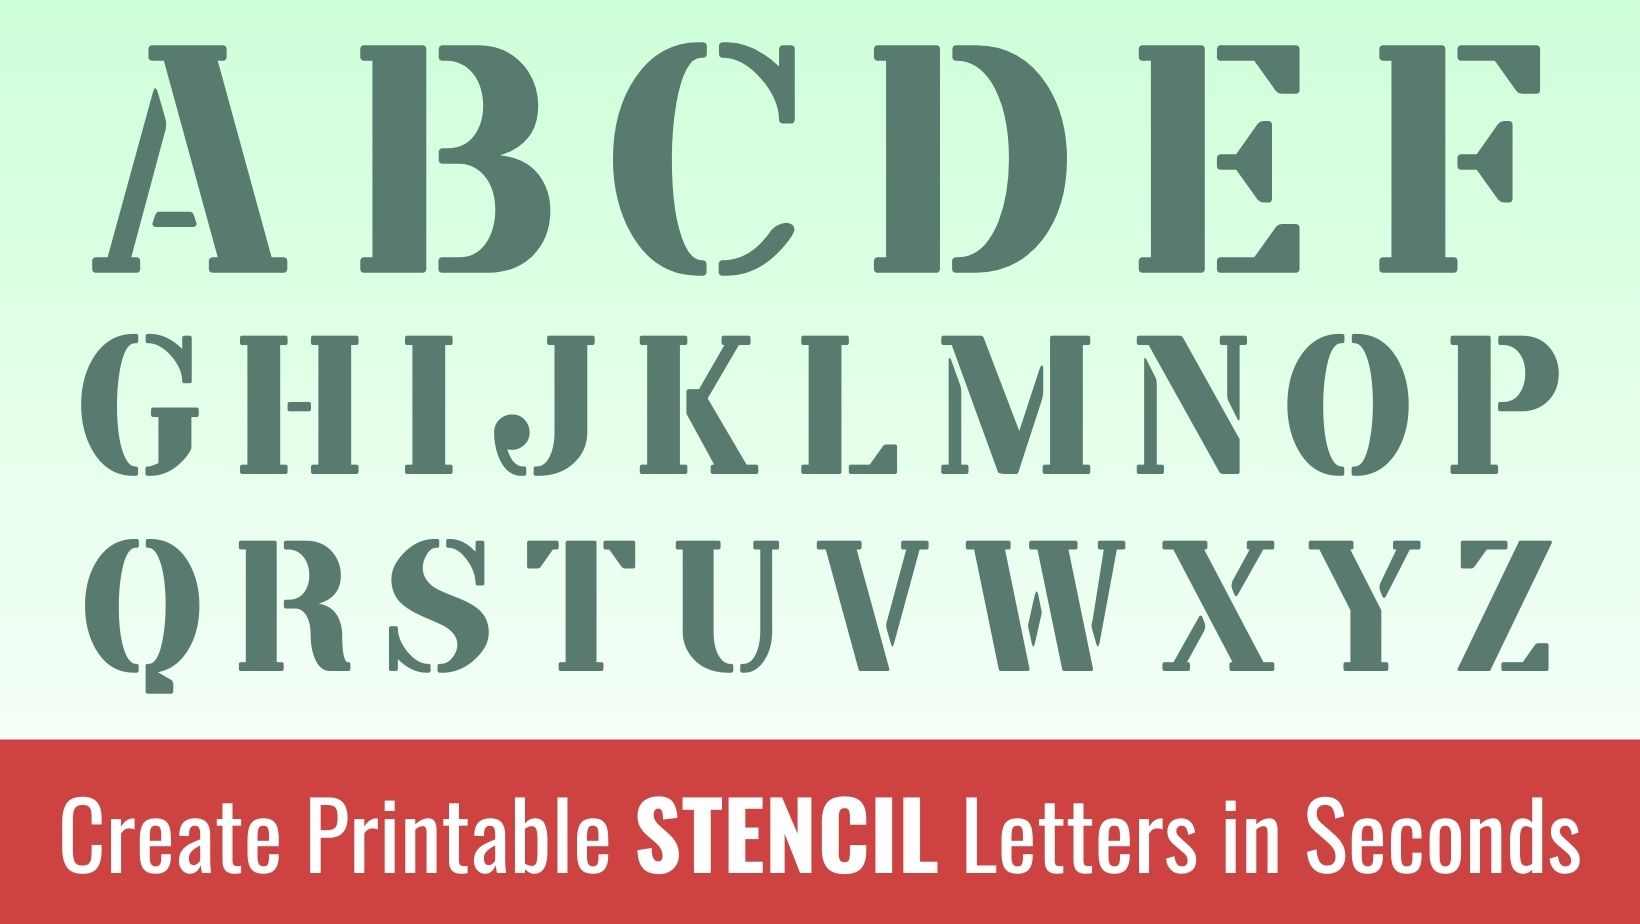 Printable Stencil Letters: Free Alphabet Font and Letter Templates